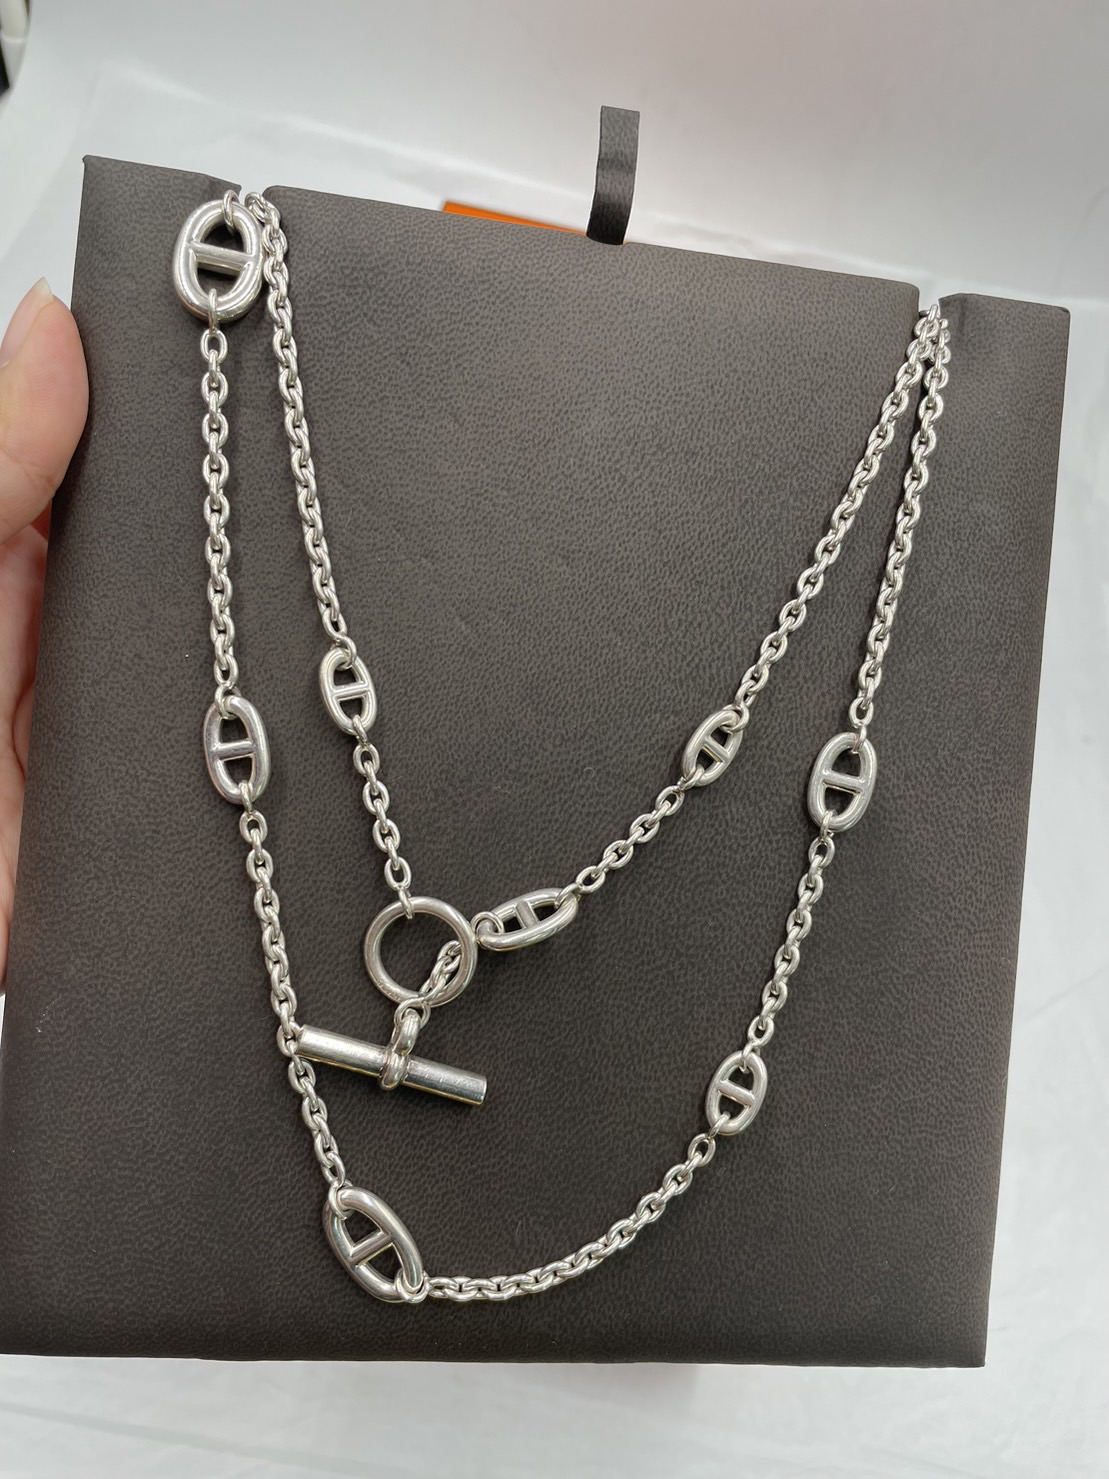 Used Hermes silver necklace  120cm